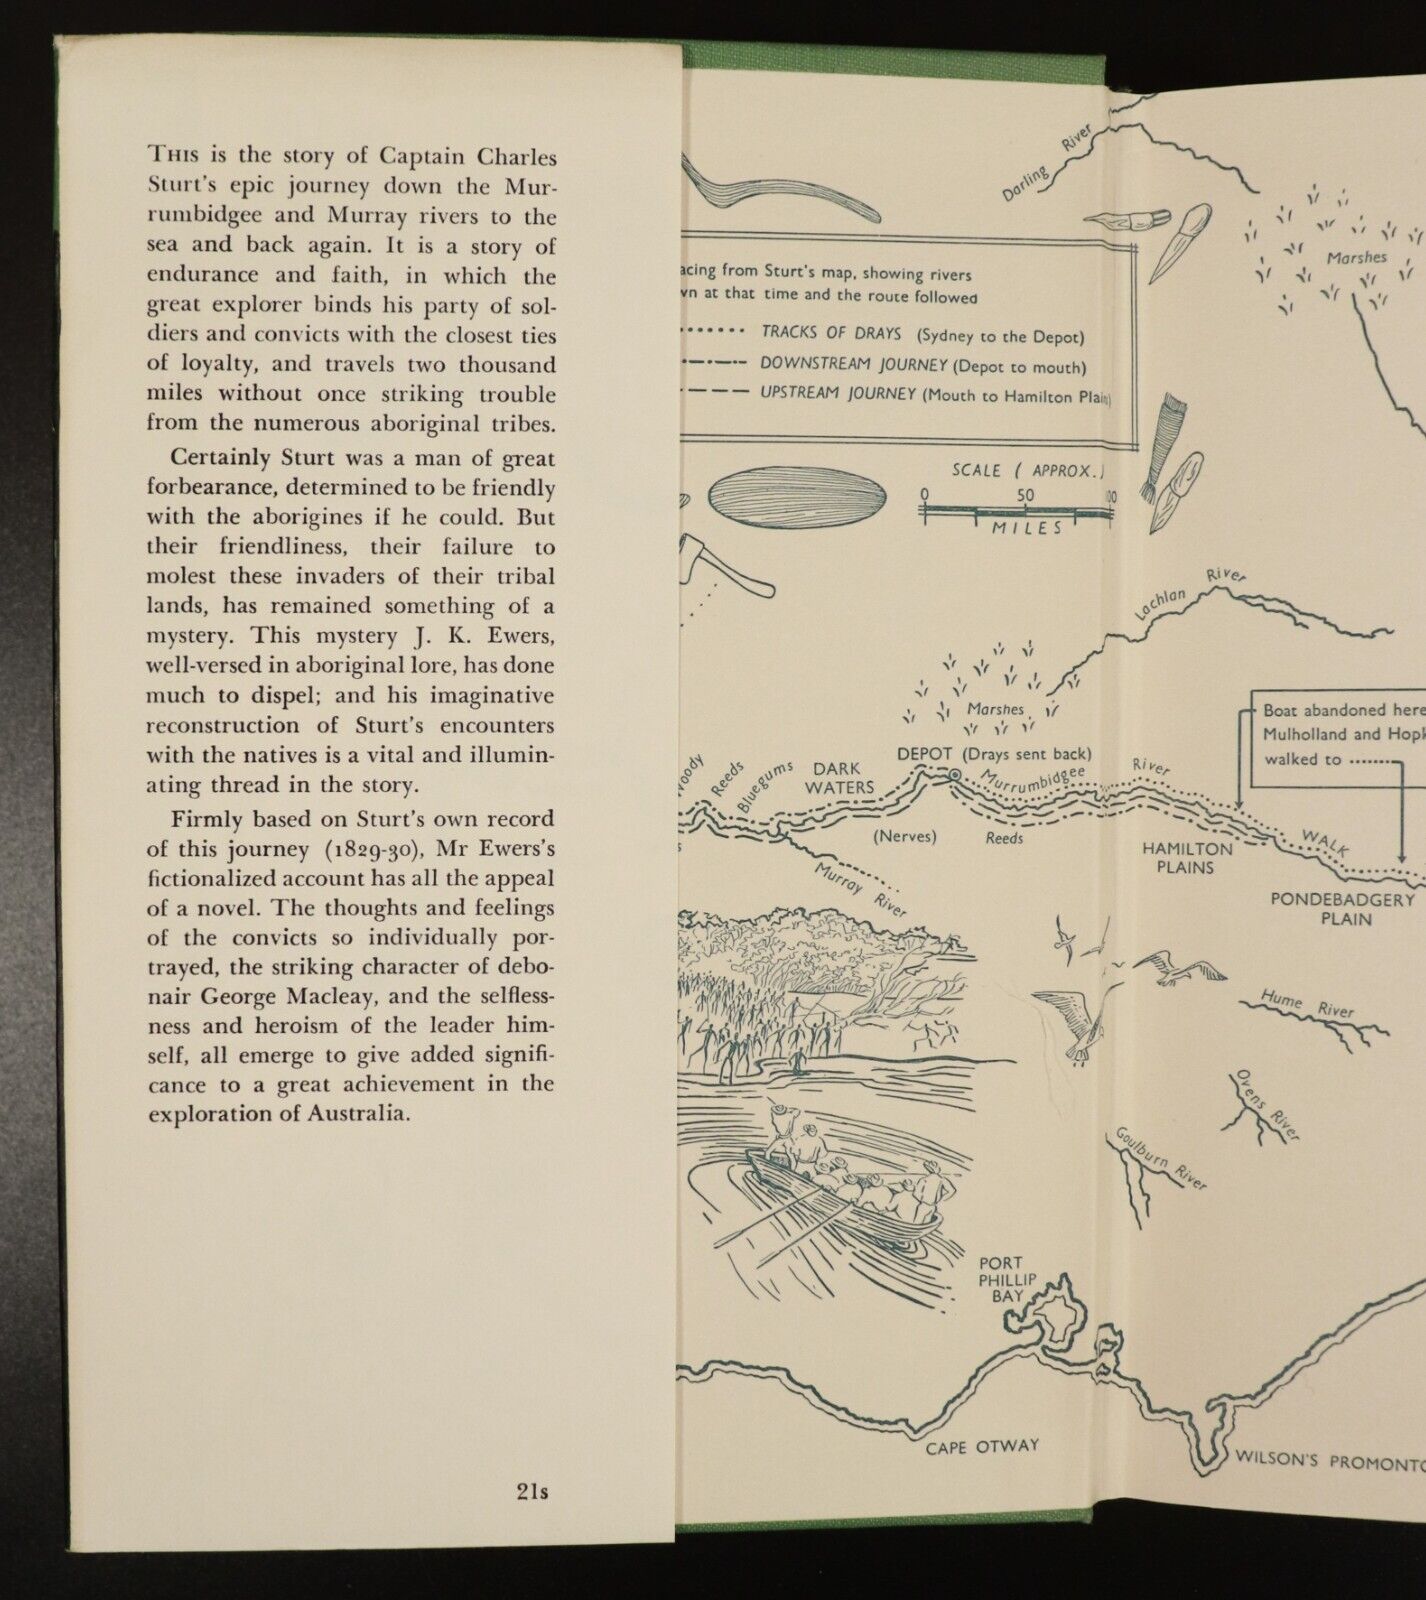 1956 Who Rides On The River by J.K. Ewers Australian Exploration History Book - 0